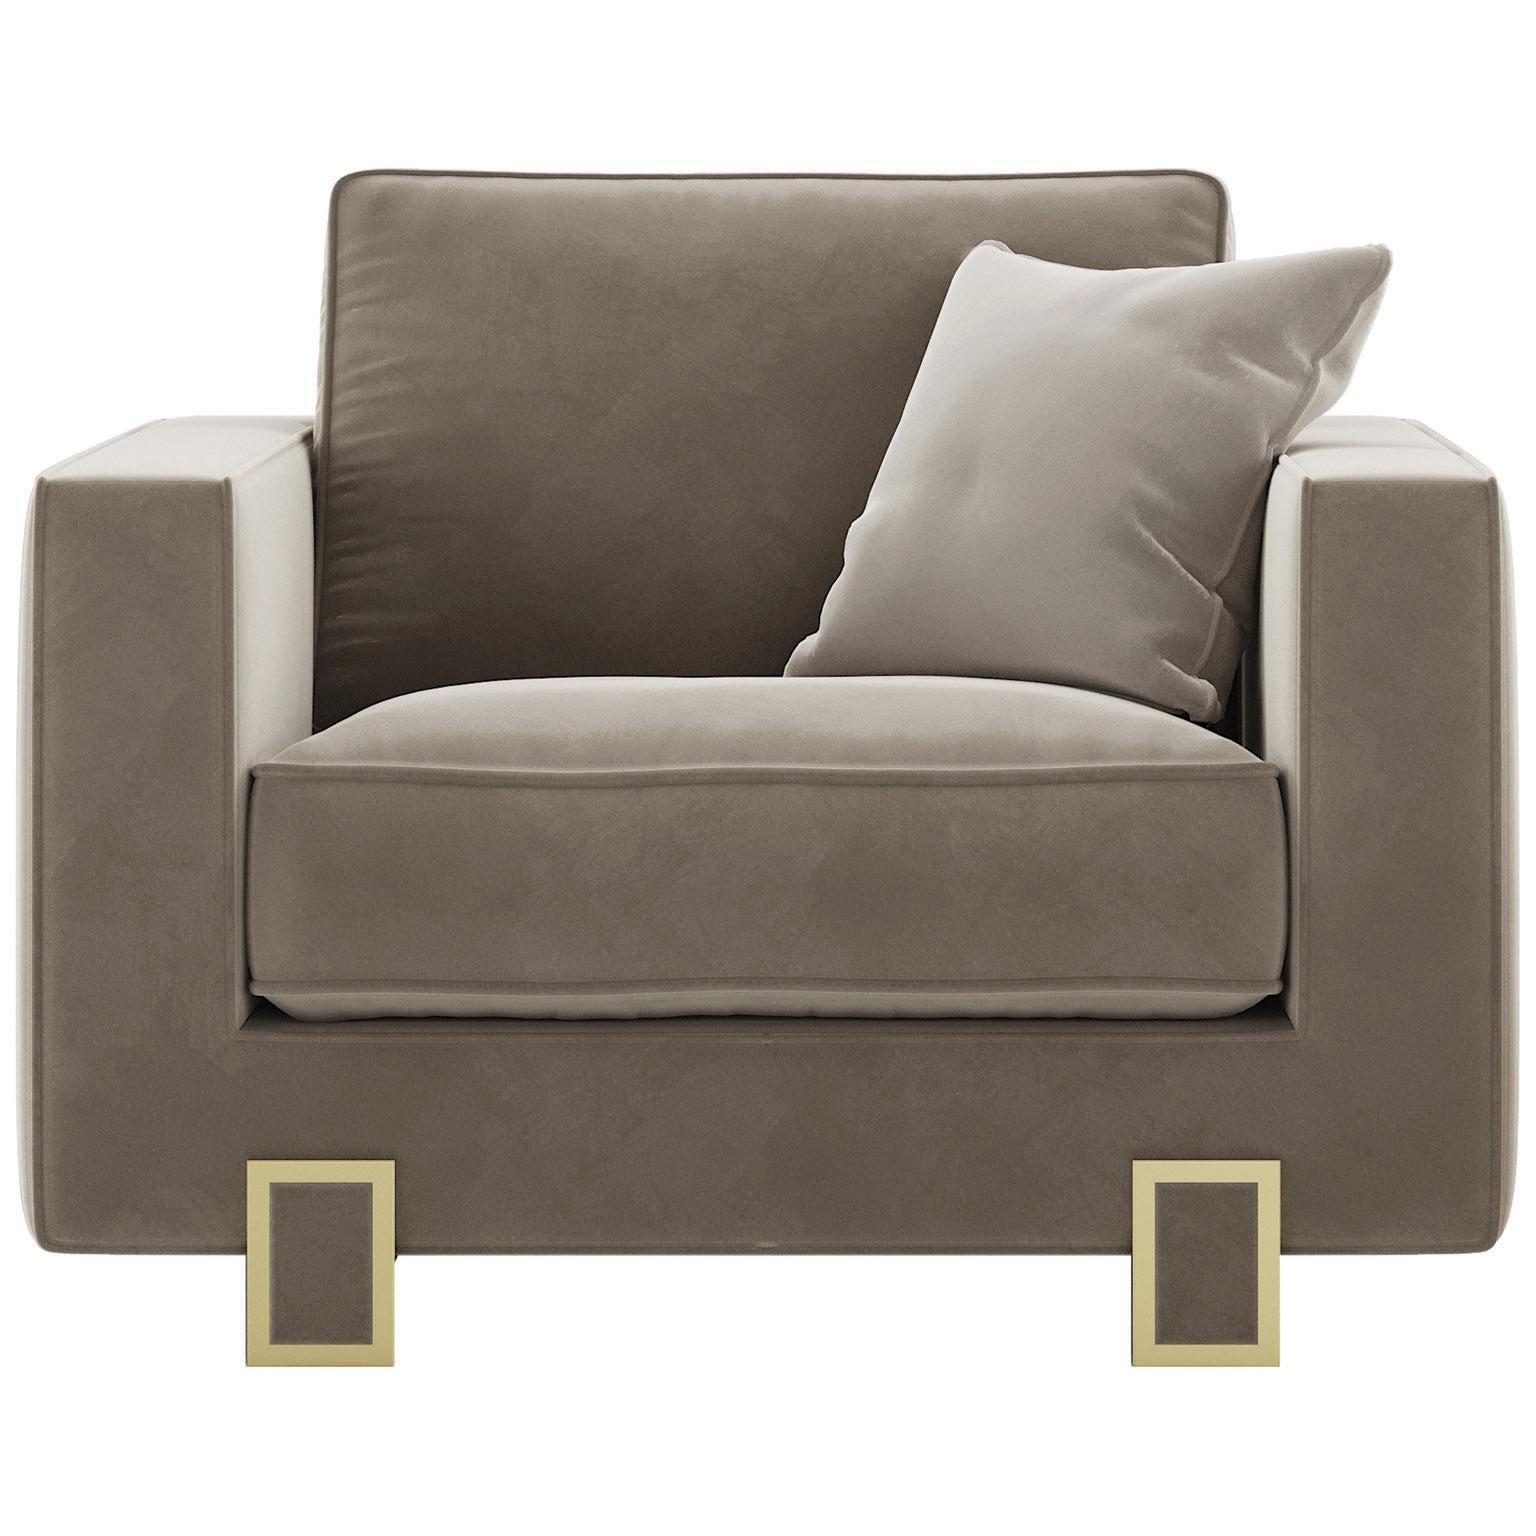 The LUSO armchair is a very delicate and elegant piece, suitable for any room decor.‎ Besides its attention to the detail, like the contrasting piping or the brass colored feet, it is also a very comfortable and engaging piece.‎
Available in a wide